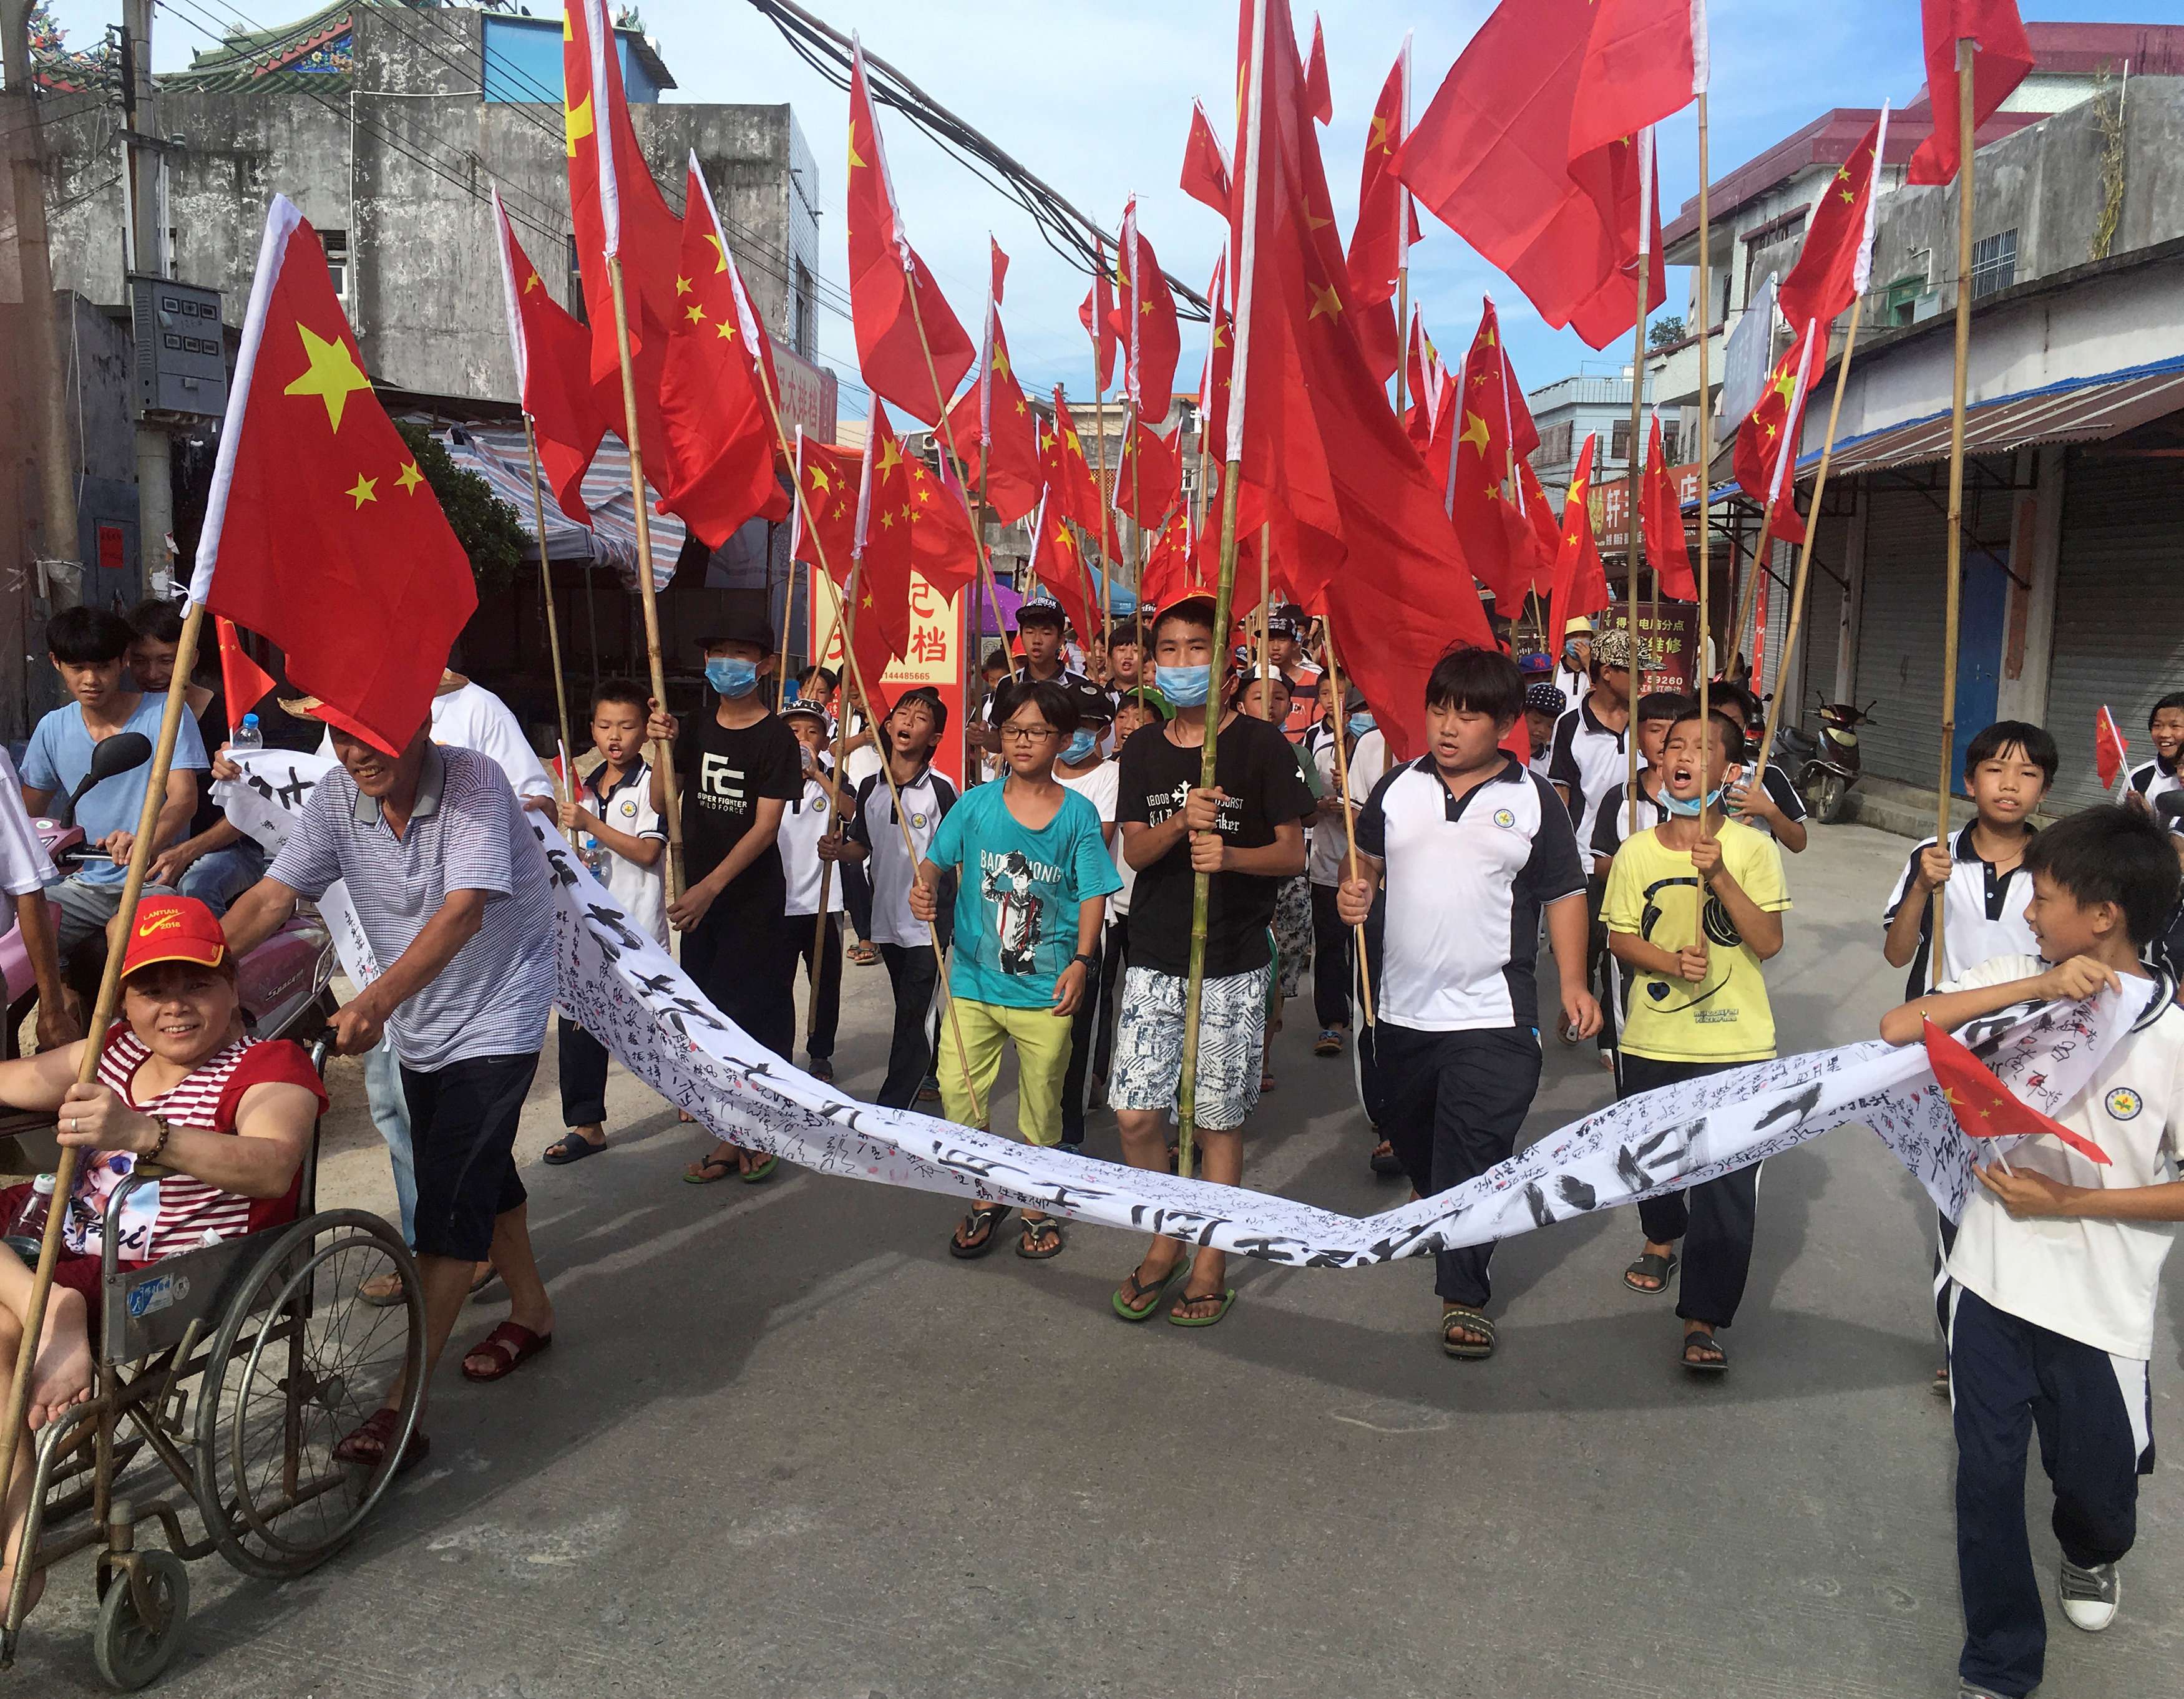 Villagers pictured during a protest in Wukan on Sunday. Photo: Reuters